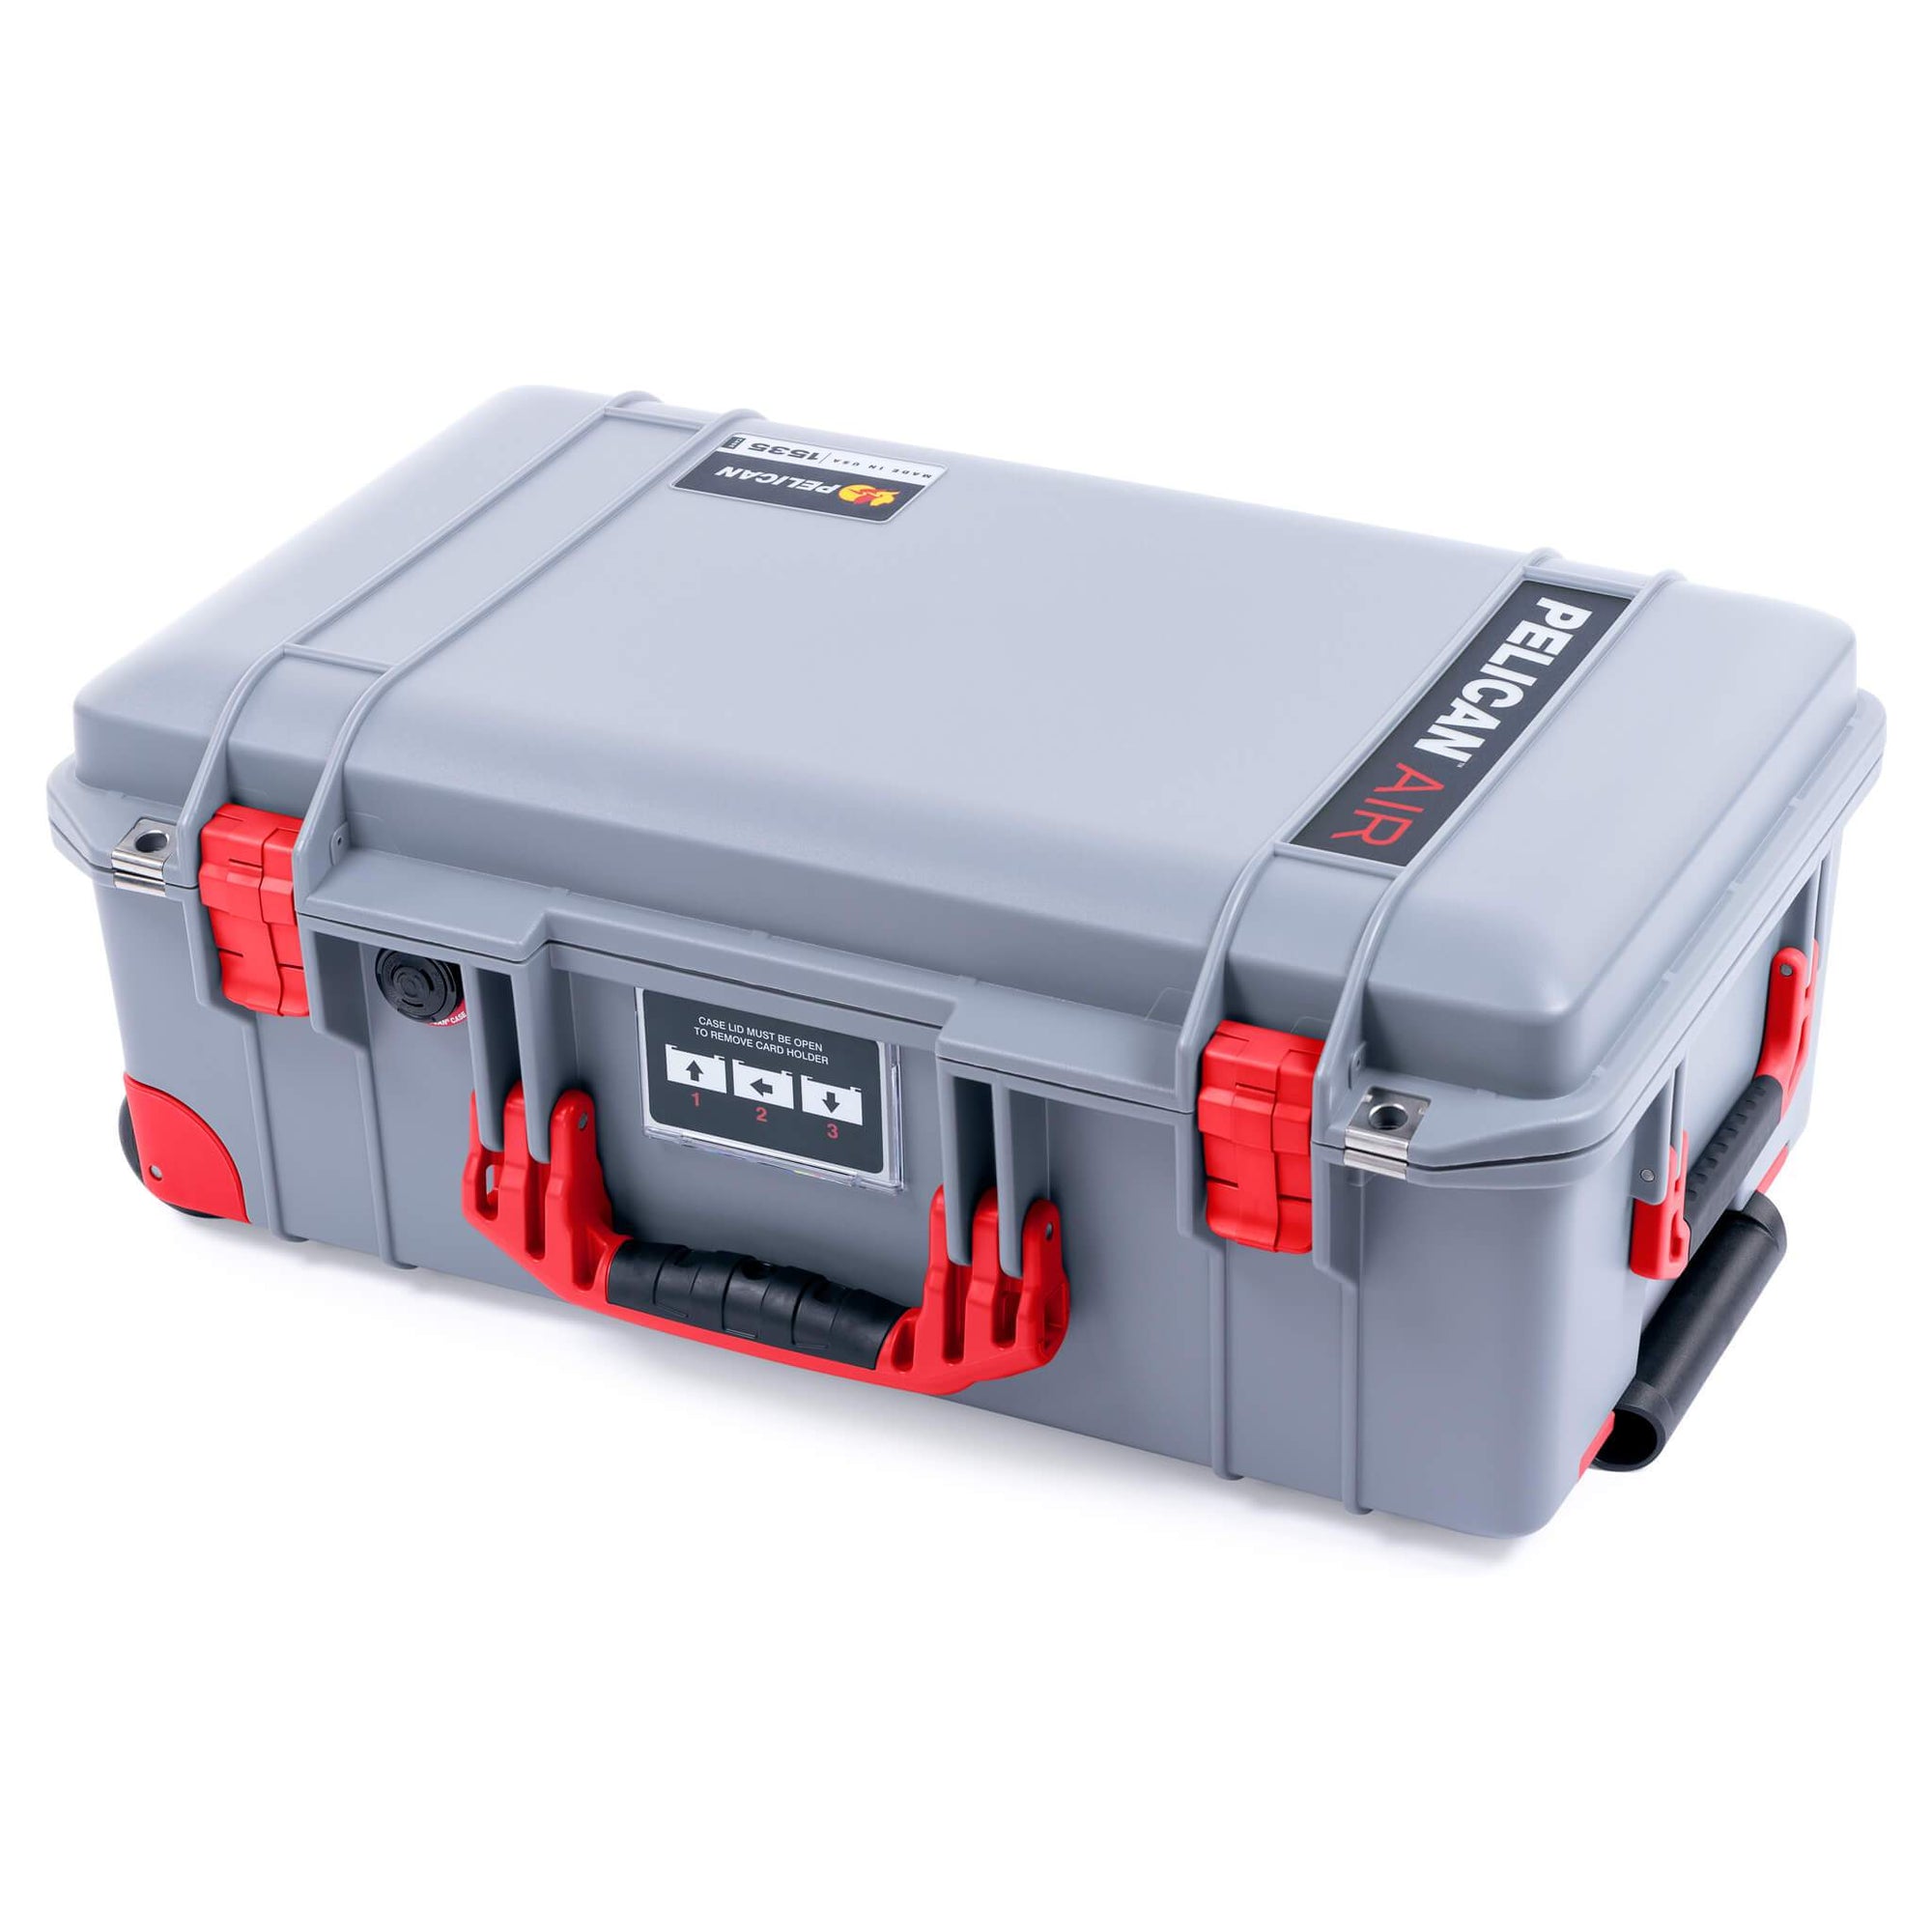 Pelican 1535 Air Case, Silver with Red Handles, Latches & Trolley ColorCase 